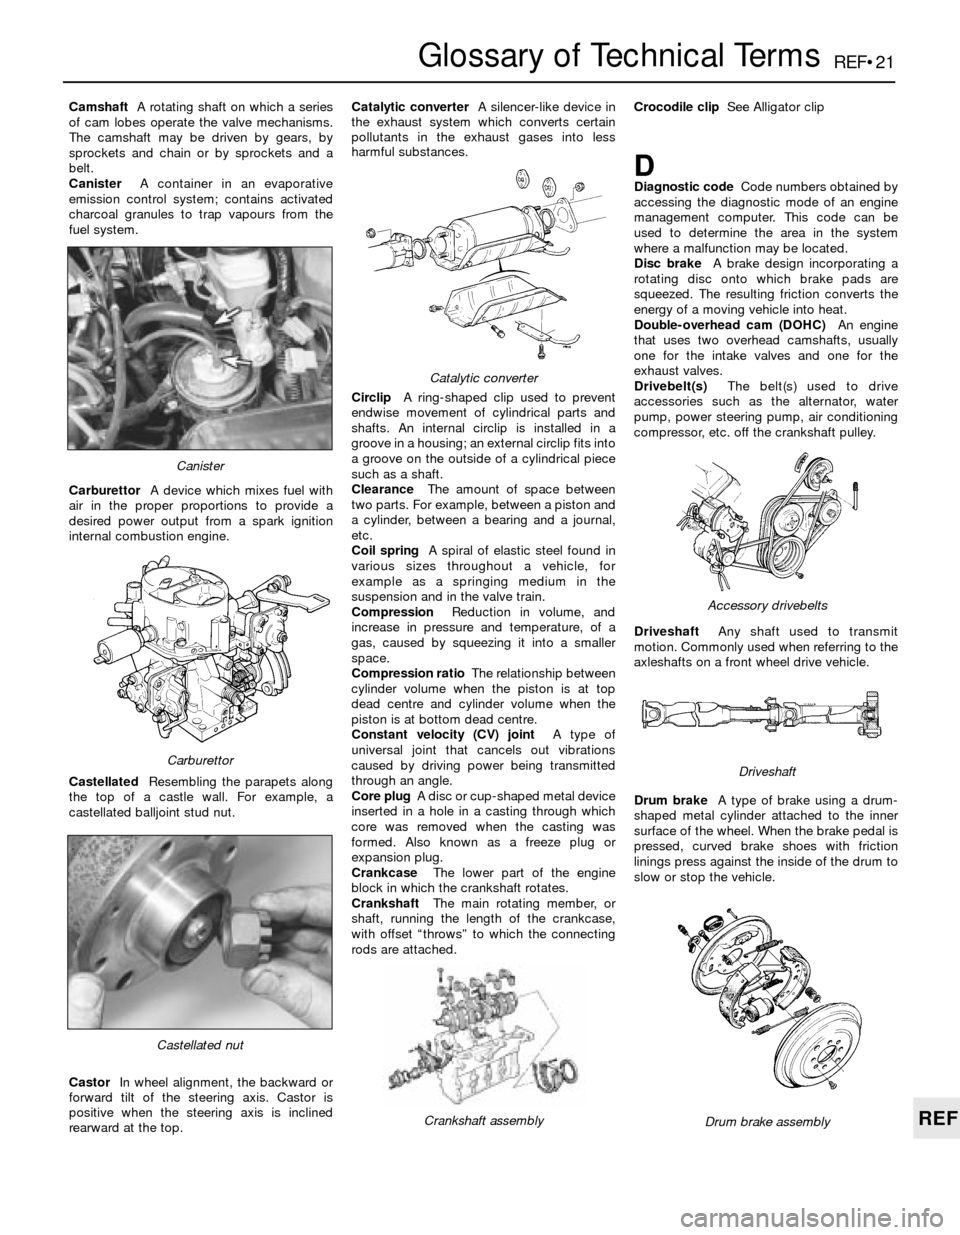 BMW 3 SERIES 1988 E30 User Guide REF•21
REF
Glossary of Technical Terms
CamshaftA rotating shaft on which a series
of cam lobes operate the valve mechanisms.
The camshaft may be driven by gears, by
sprockets and chain or by sprocke